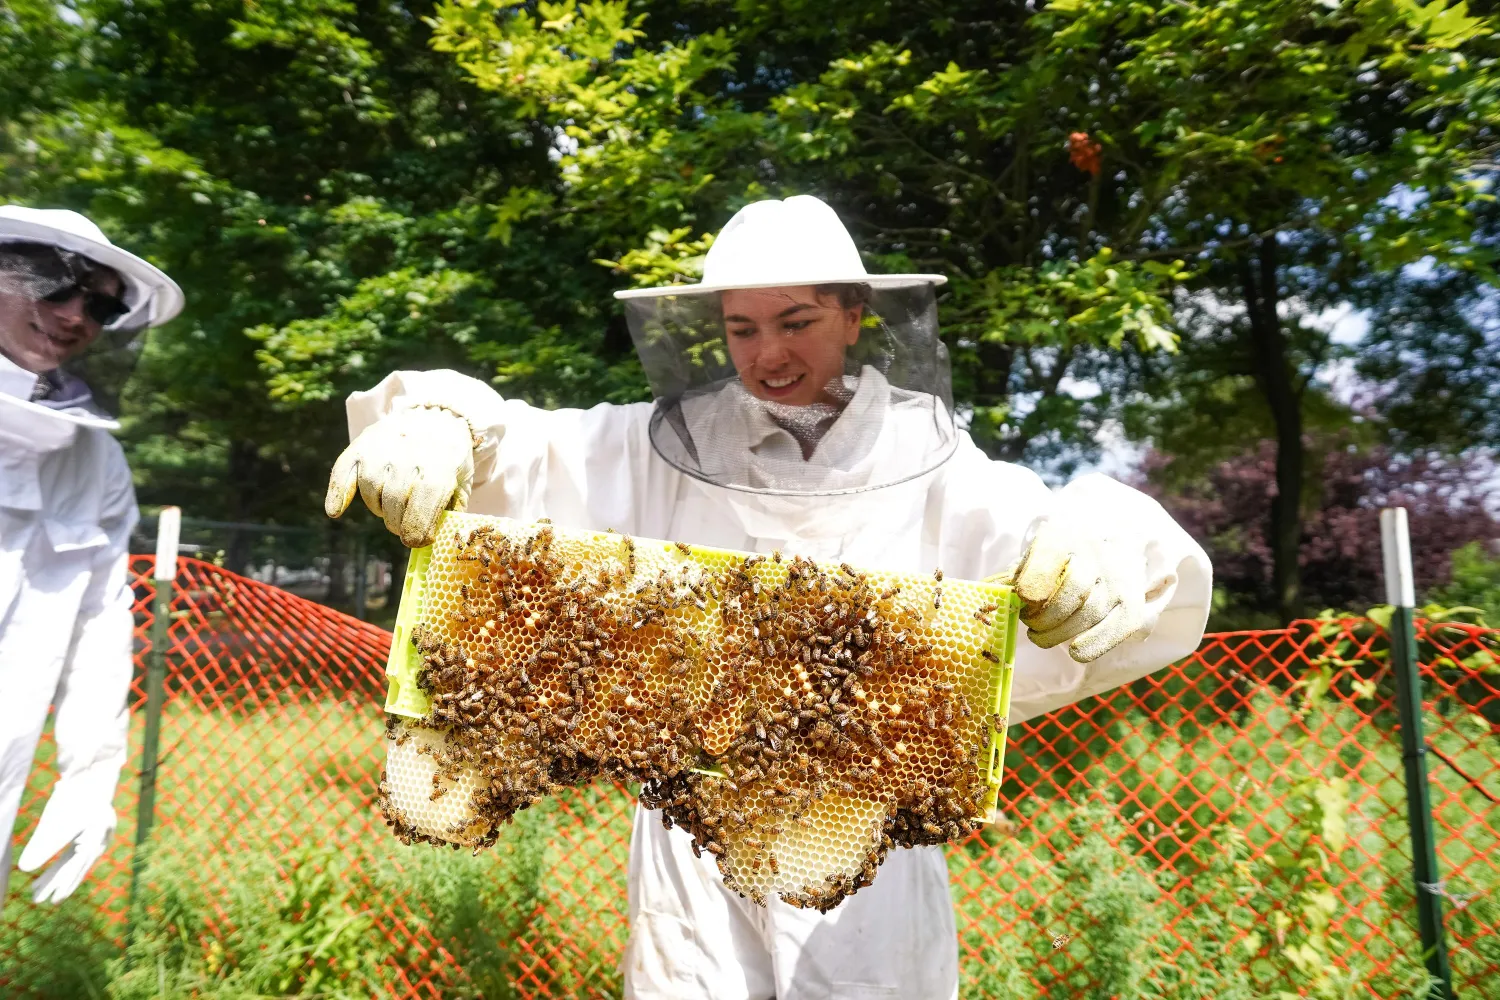 student in a beekeeper suit, holding a panel from a beehive